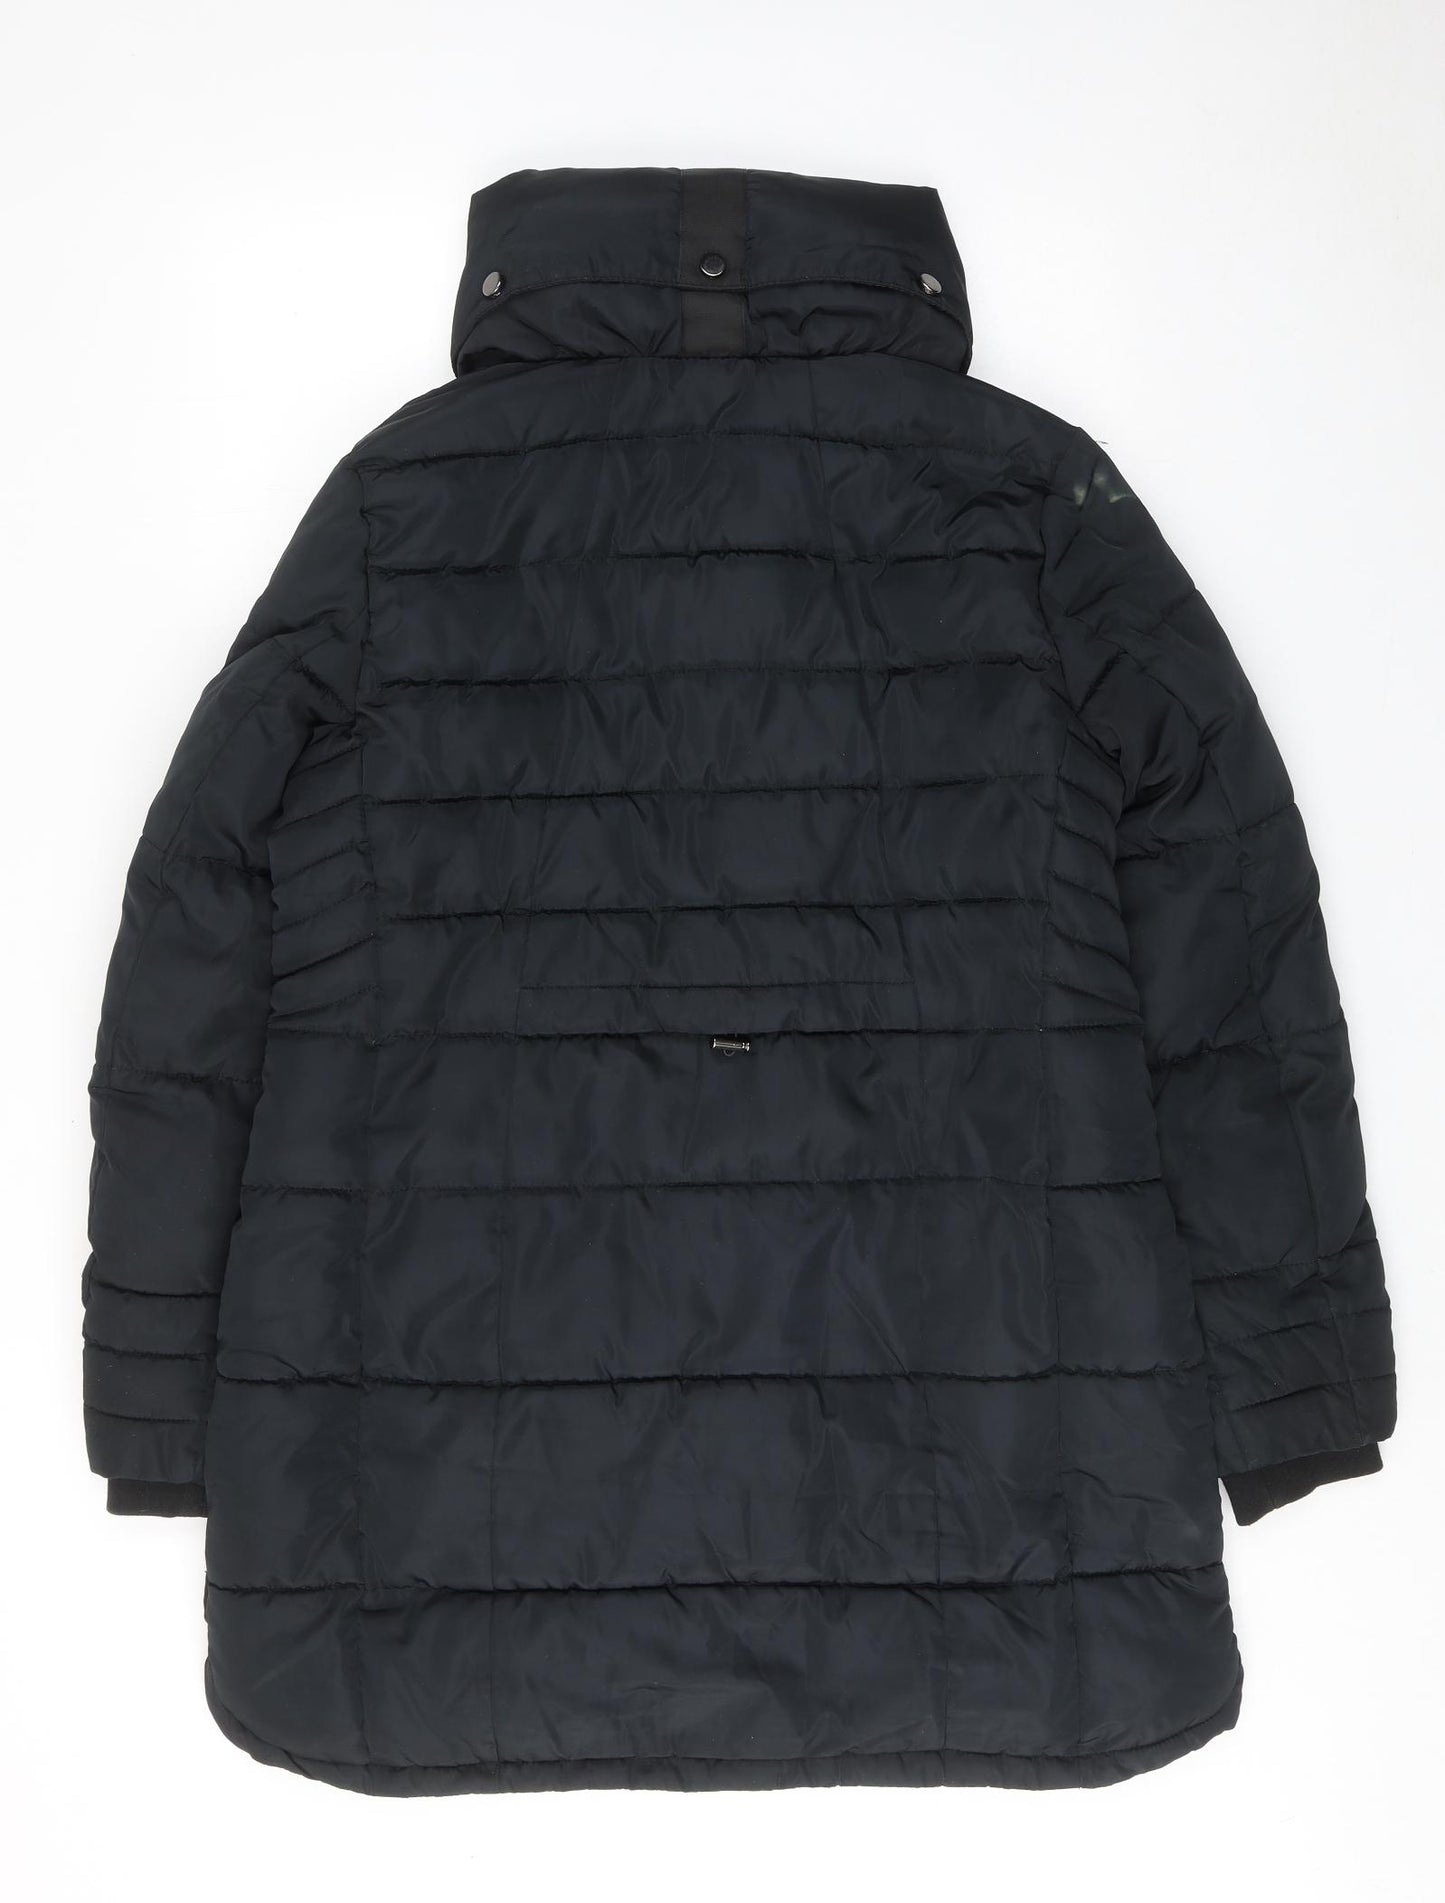 NEXT Womens Black Quilted Coat Size 16 Zip